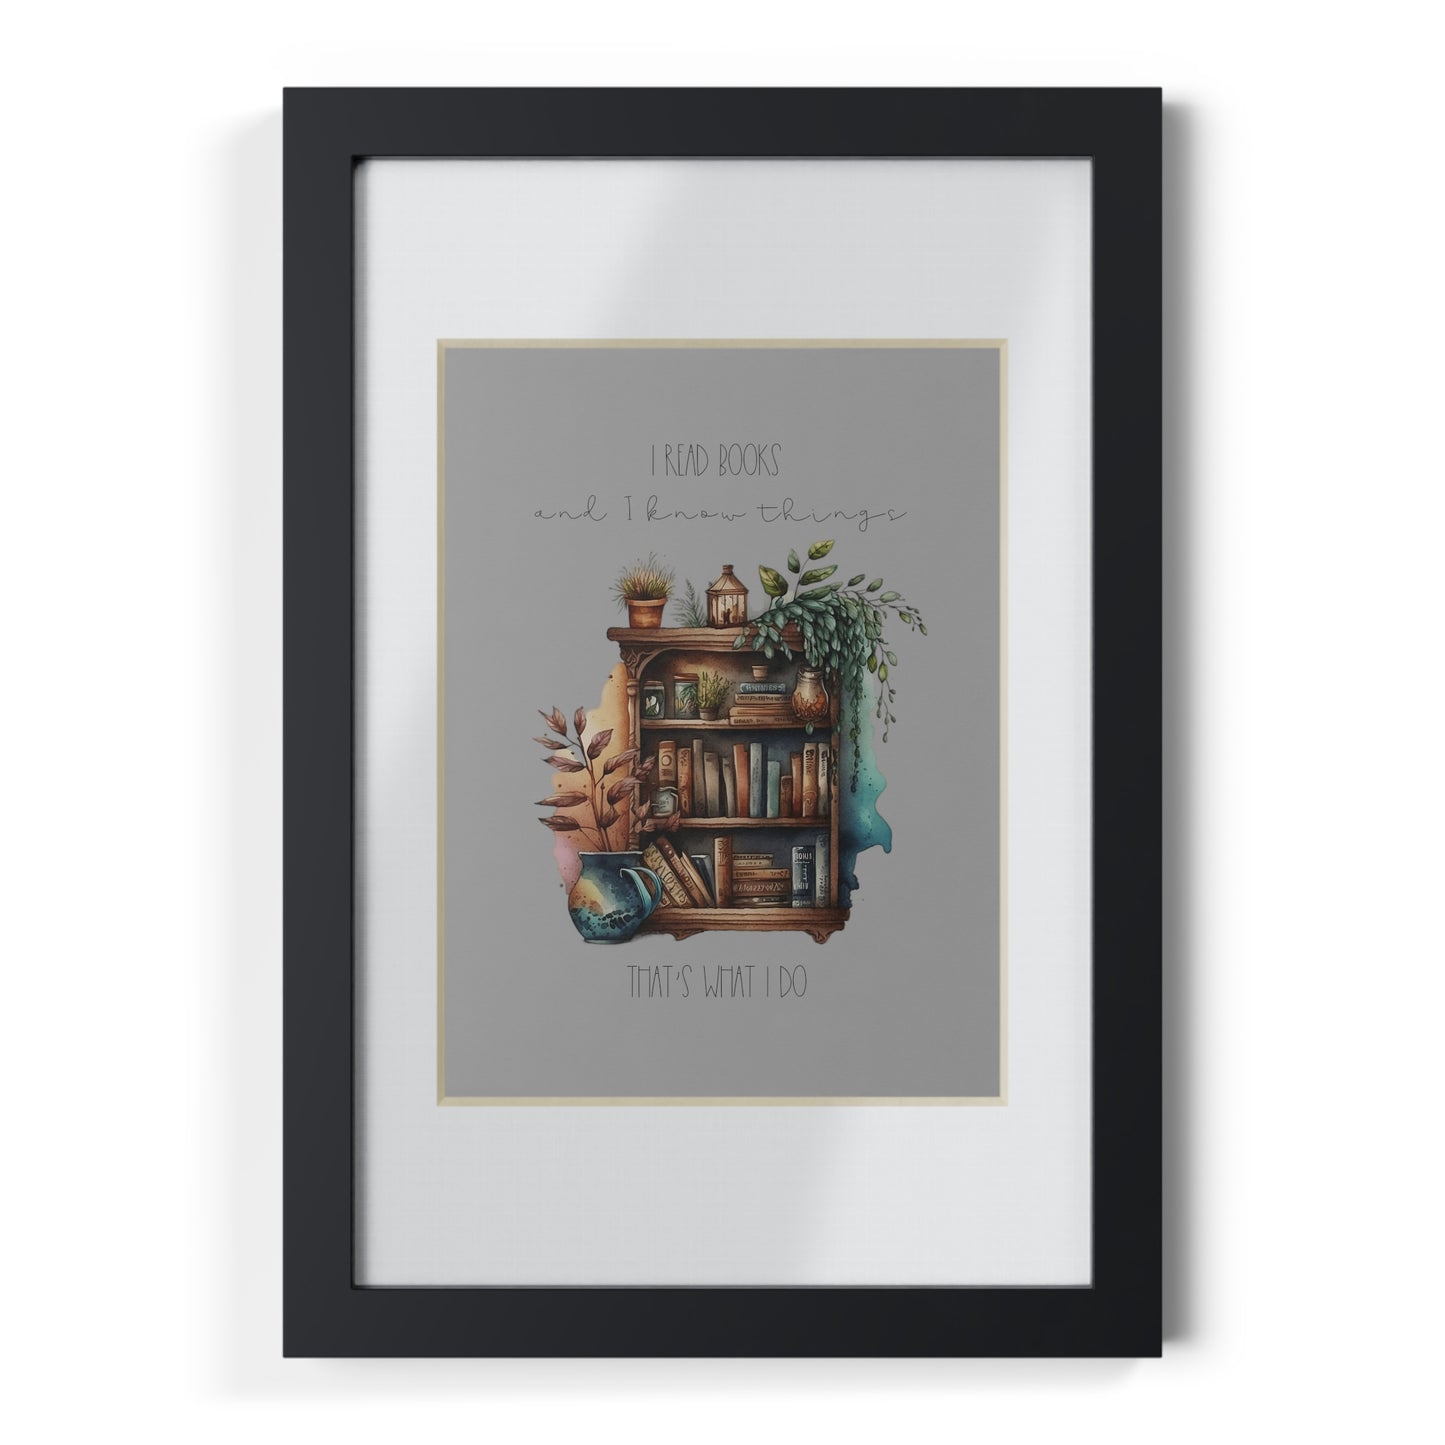 Framed Posters, Black. “I read books and I know things.”